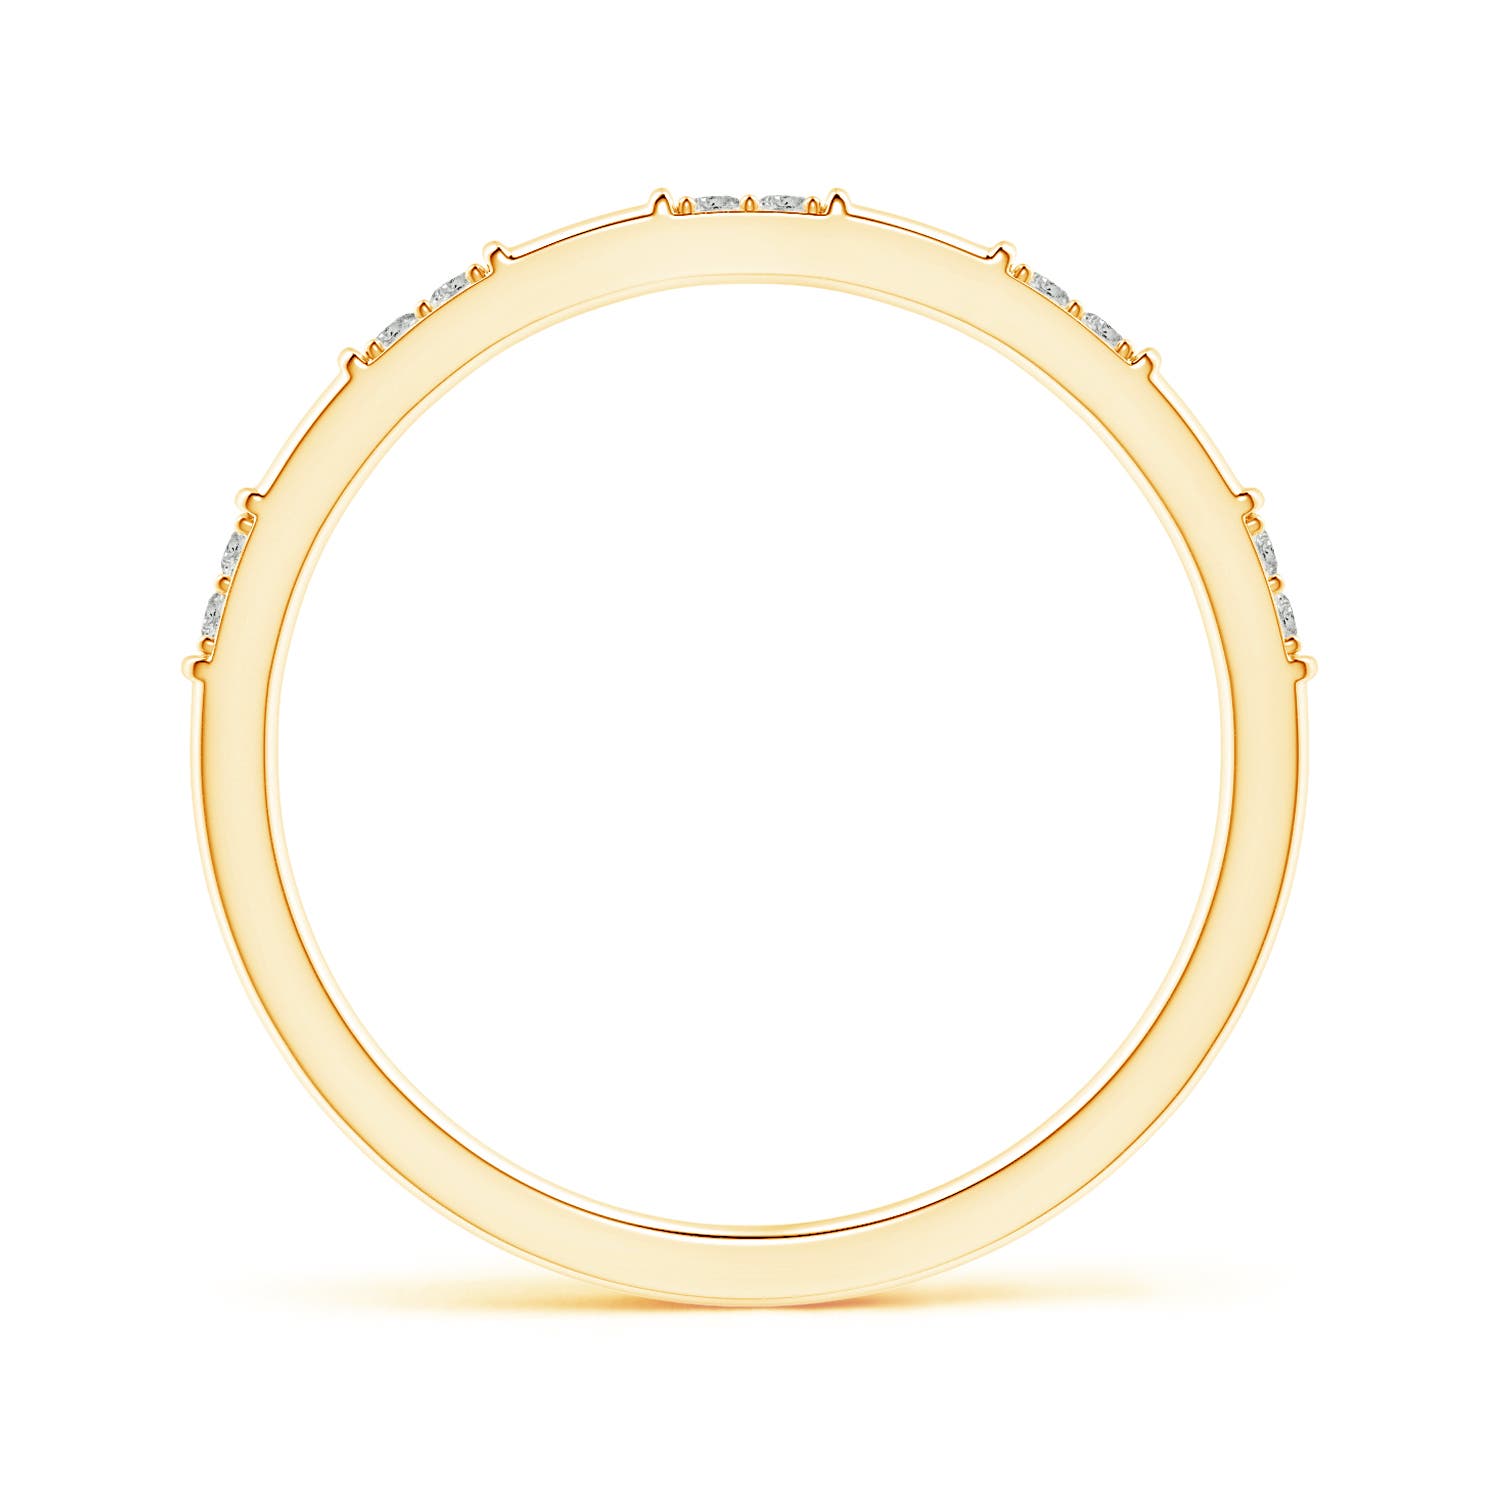 K, I3 / 0.08 CT / 14 KT Yellow Gold